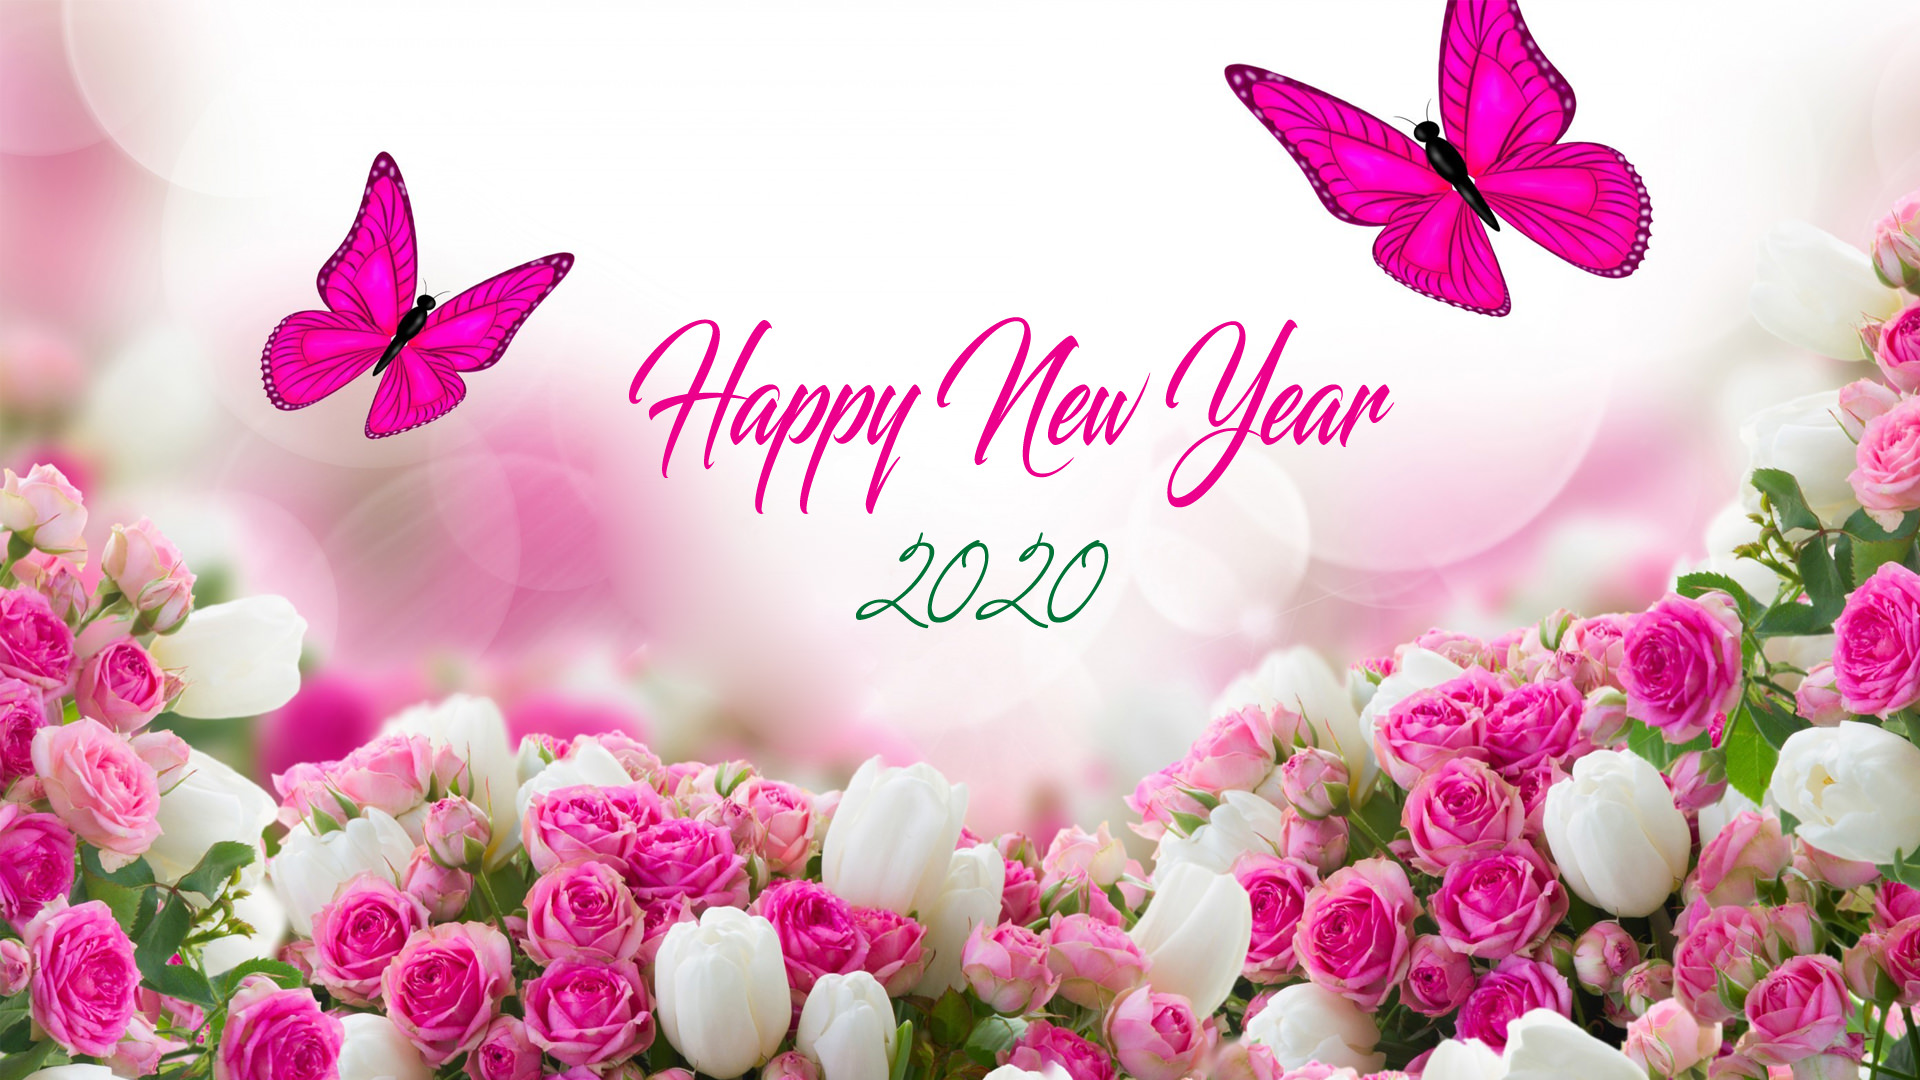 Happy New Year 2K20 HD Images with Pink Roses and Butterfly